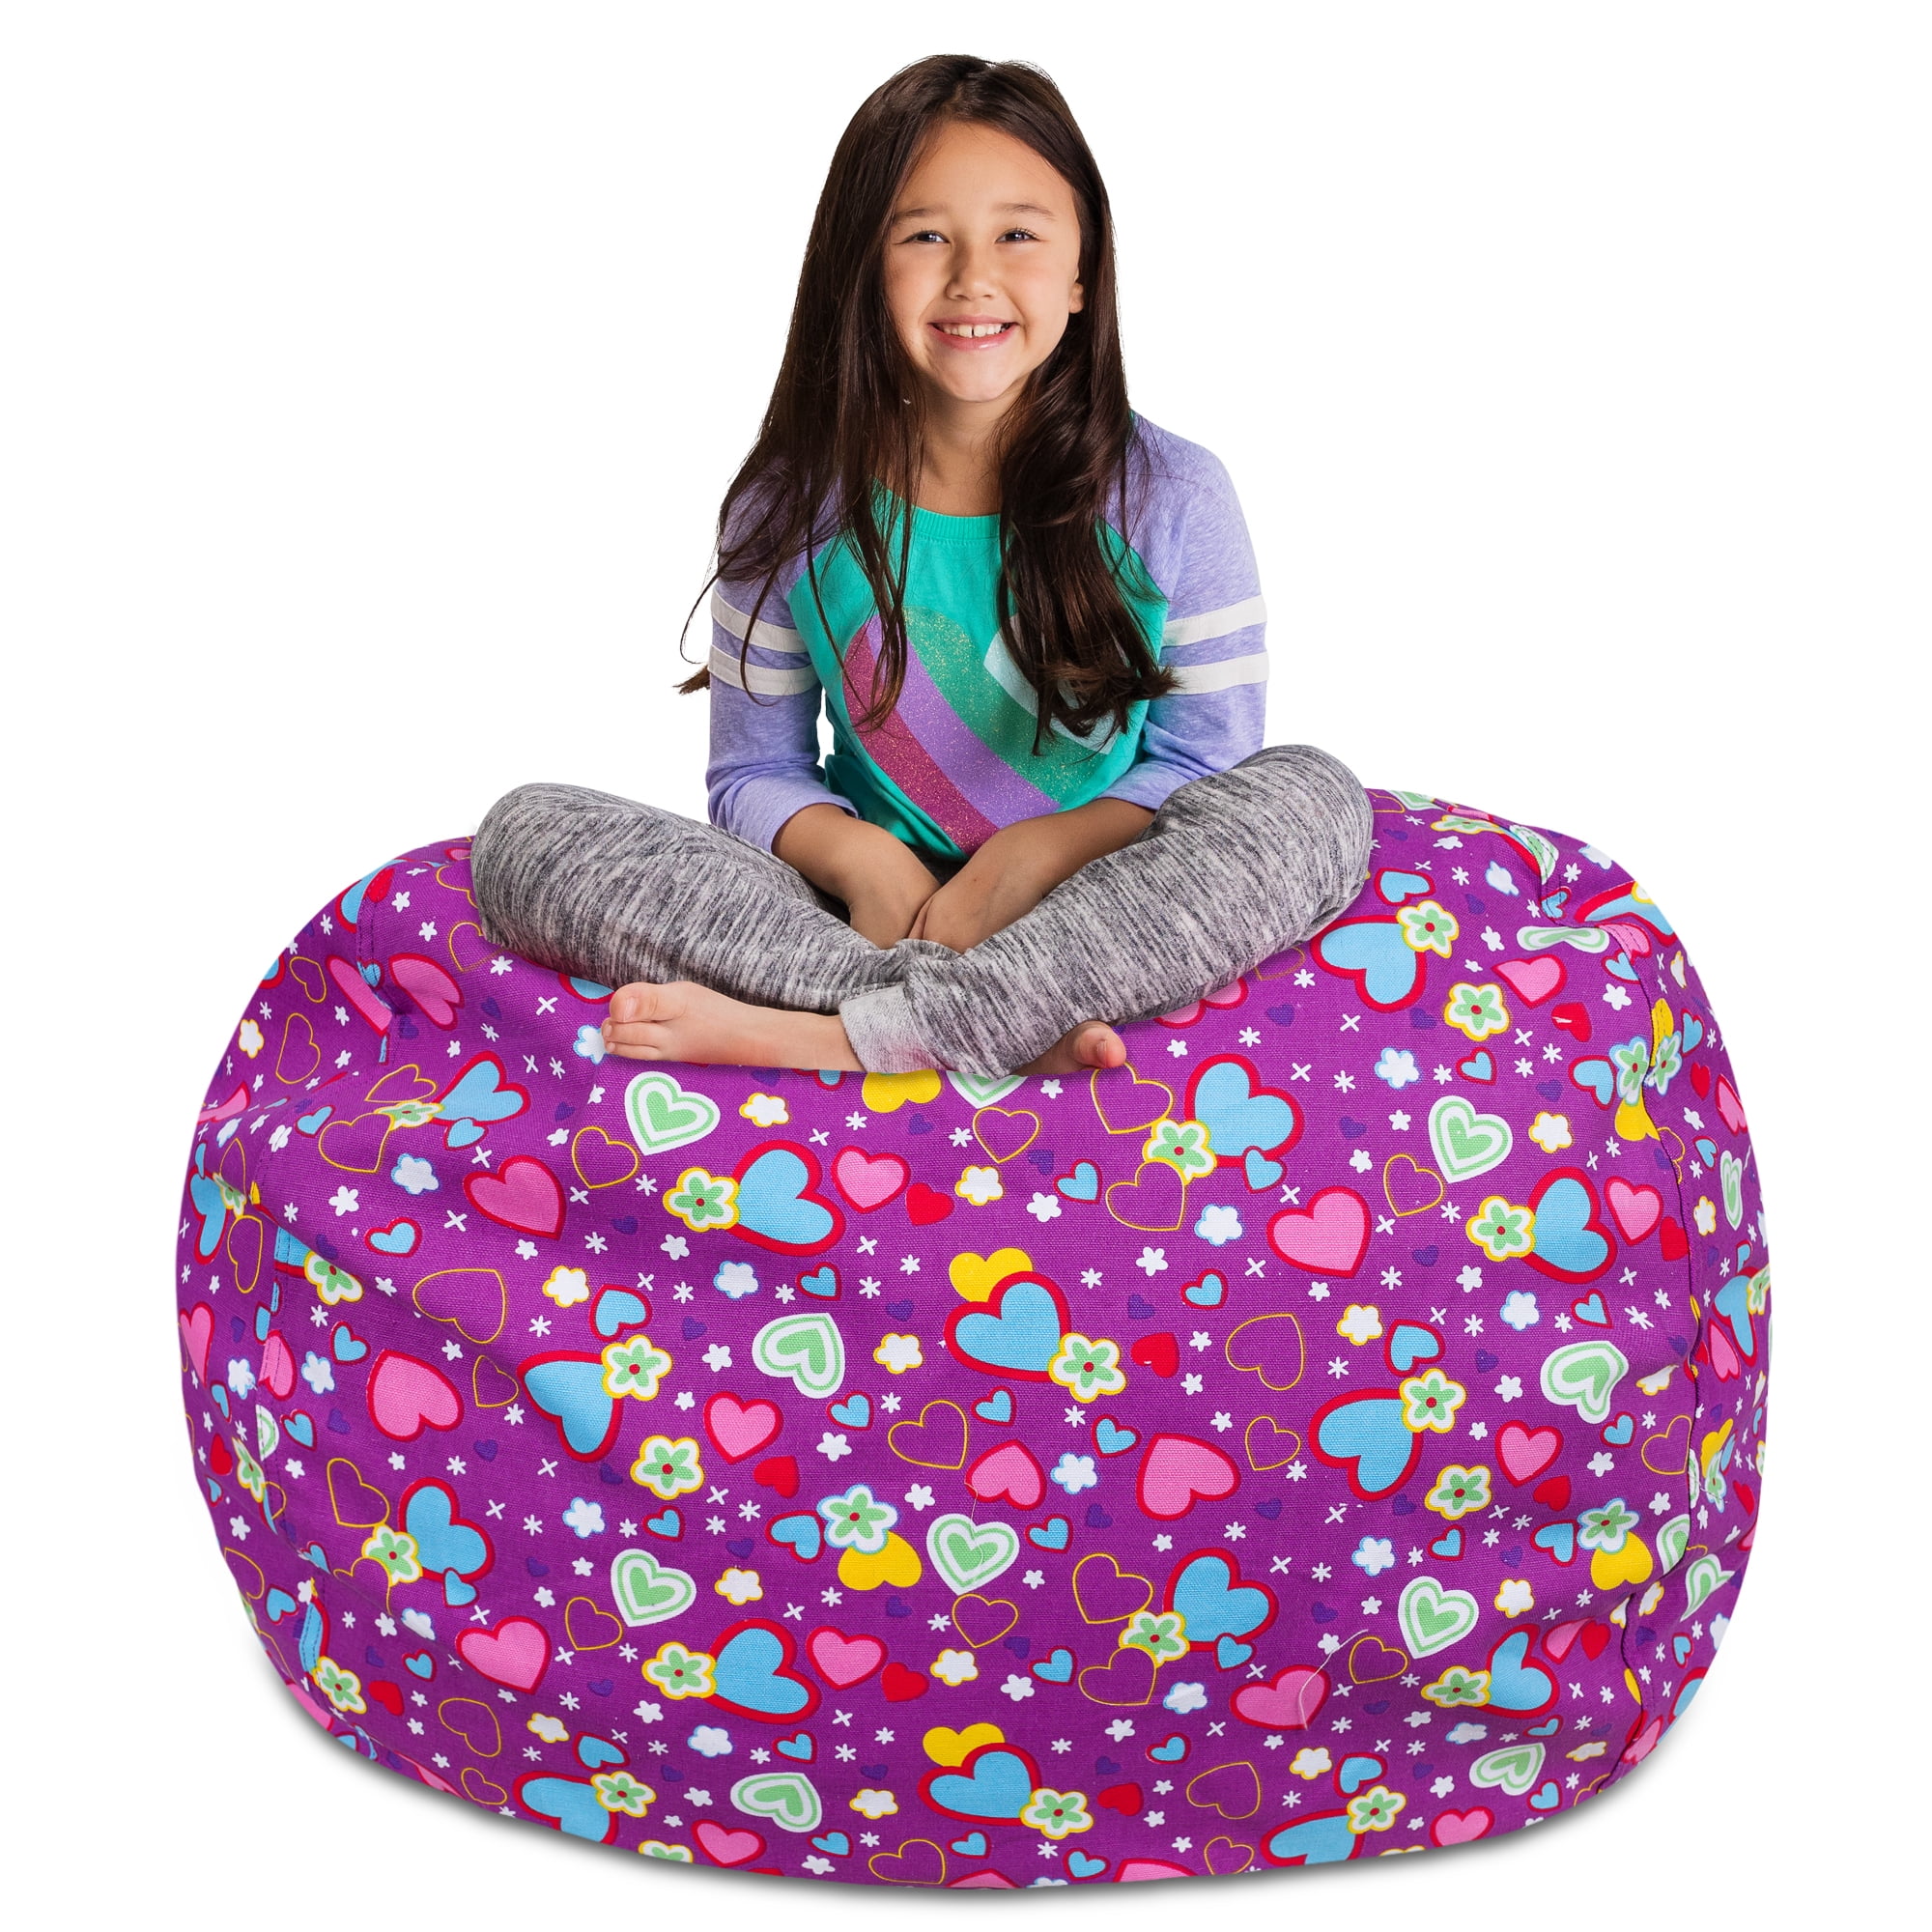 Most Wished For: Items customers added to Wish Lists and  registries most often in Kids' Bean Bag Chairs